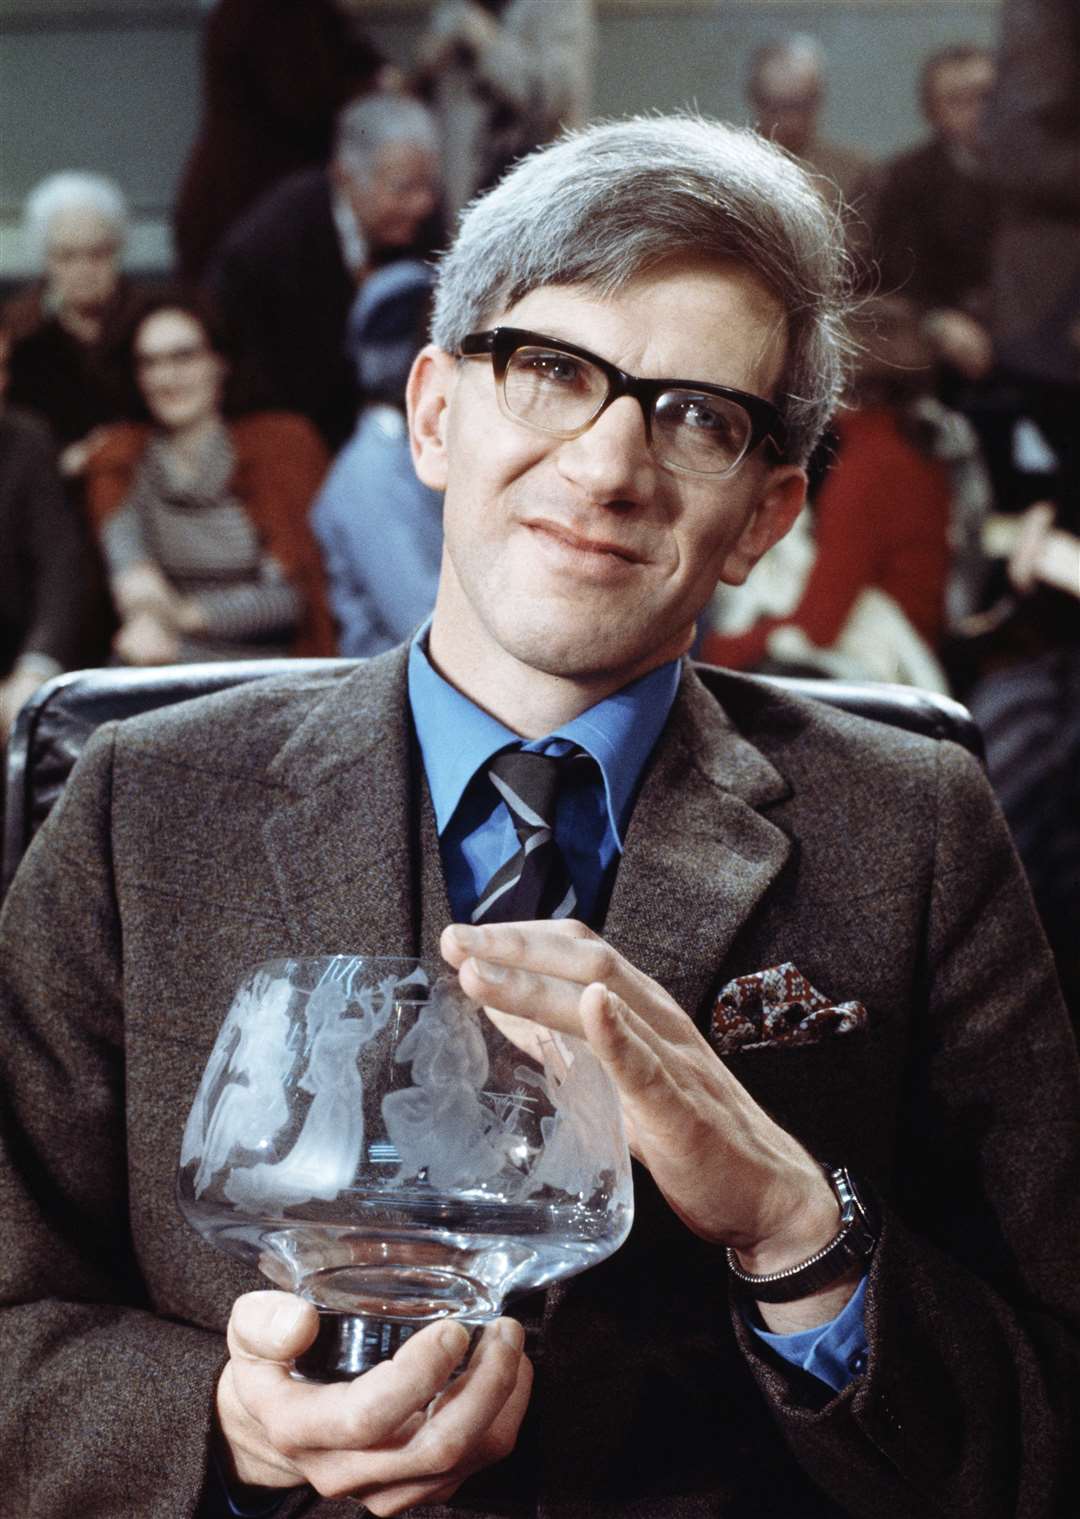 John Hart, the first male champion in 1975, with his trophy. Picture: BBC